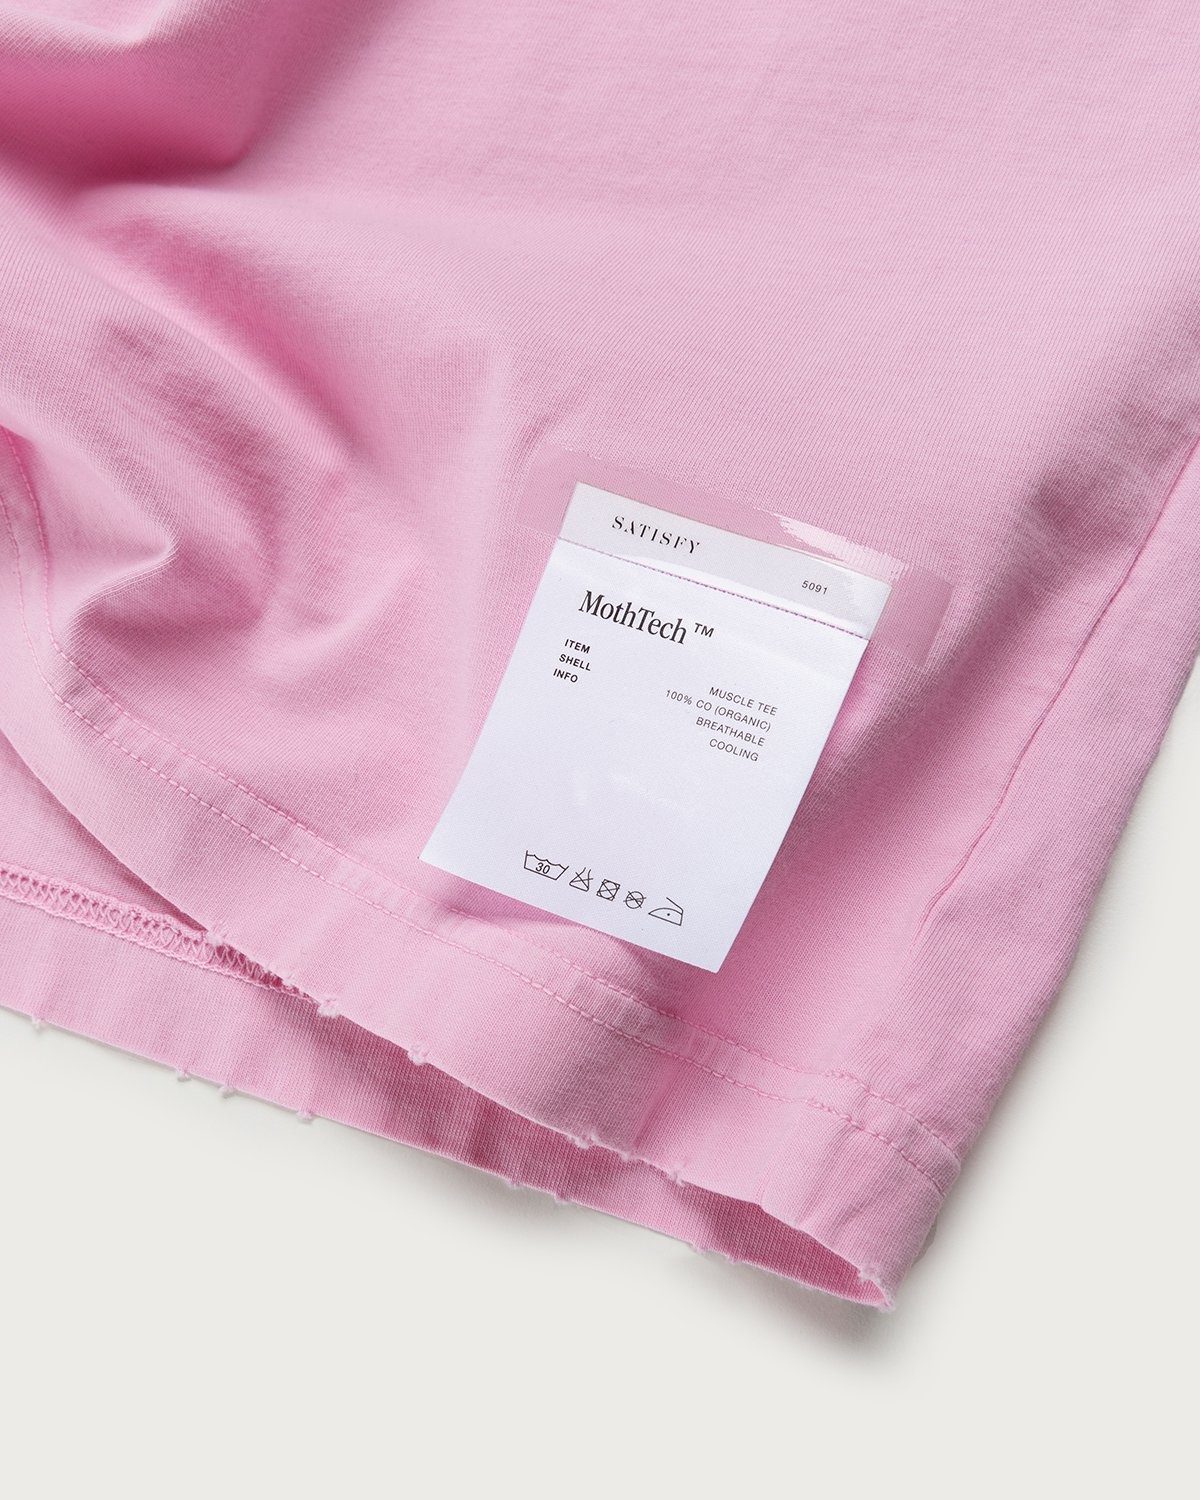 Satisfy x Highsnobiety – HS Sports Balance Muscle Tee Pink - Tops - Pink - Image 5